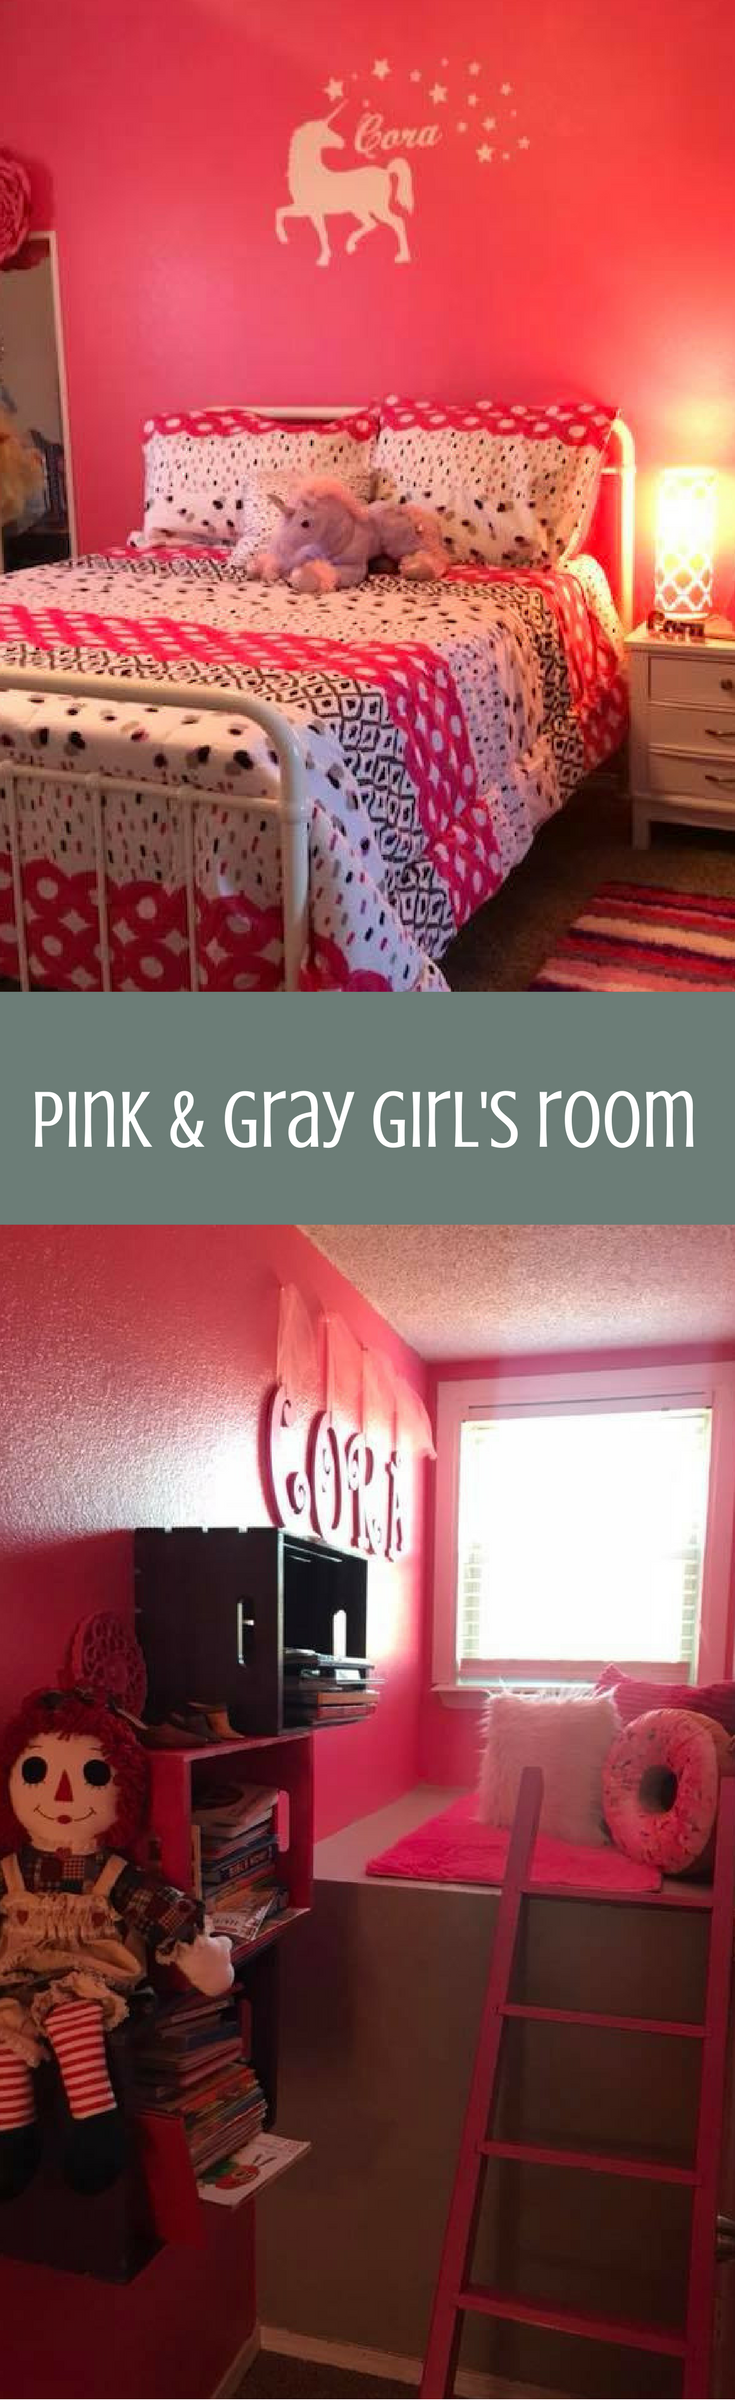 Create a Pink & Gray Girl's Room